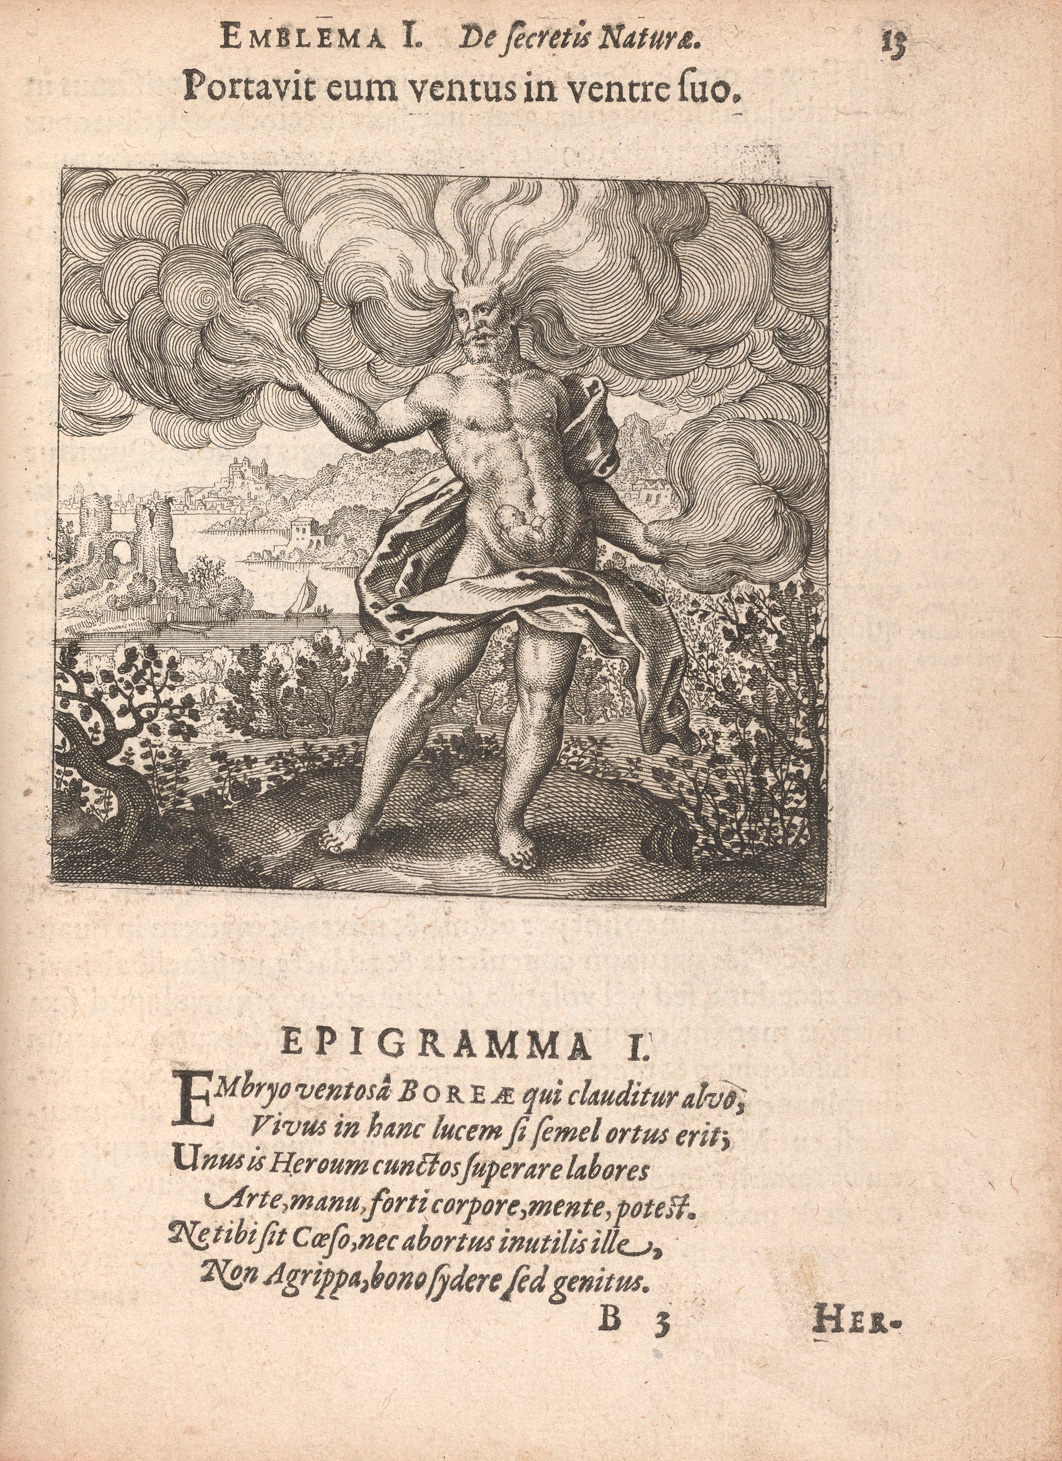 A page from Atalanta fugiens presents Emblem 1 and its epigram. In the emblem, a bearded nude man, identified as Boreas, with wind gusts extending from his head and arms, has a fetus inside his stomach. He is standing amongst bushes with a river and cityscape in the background.